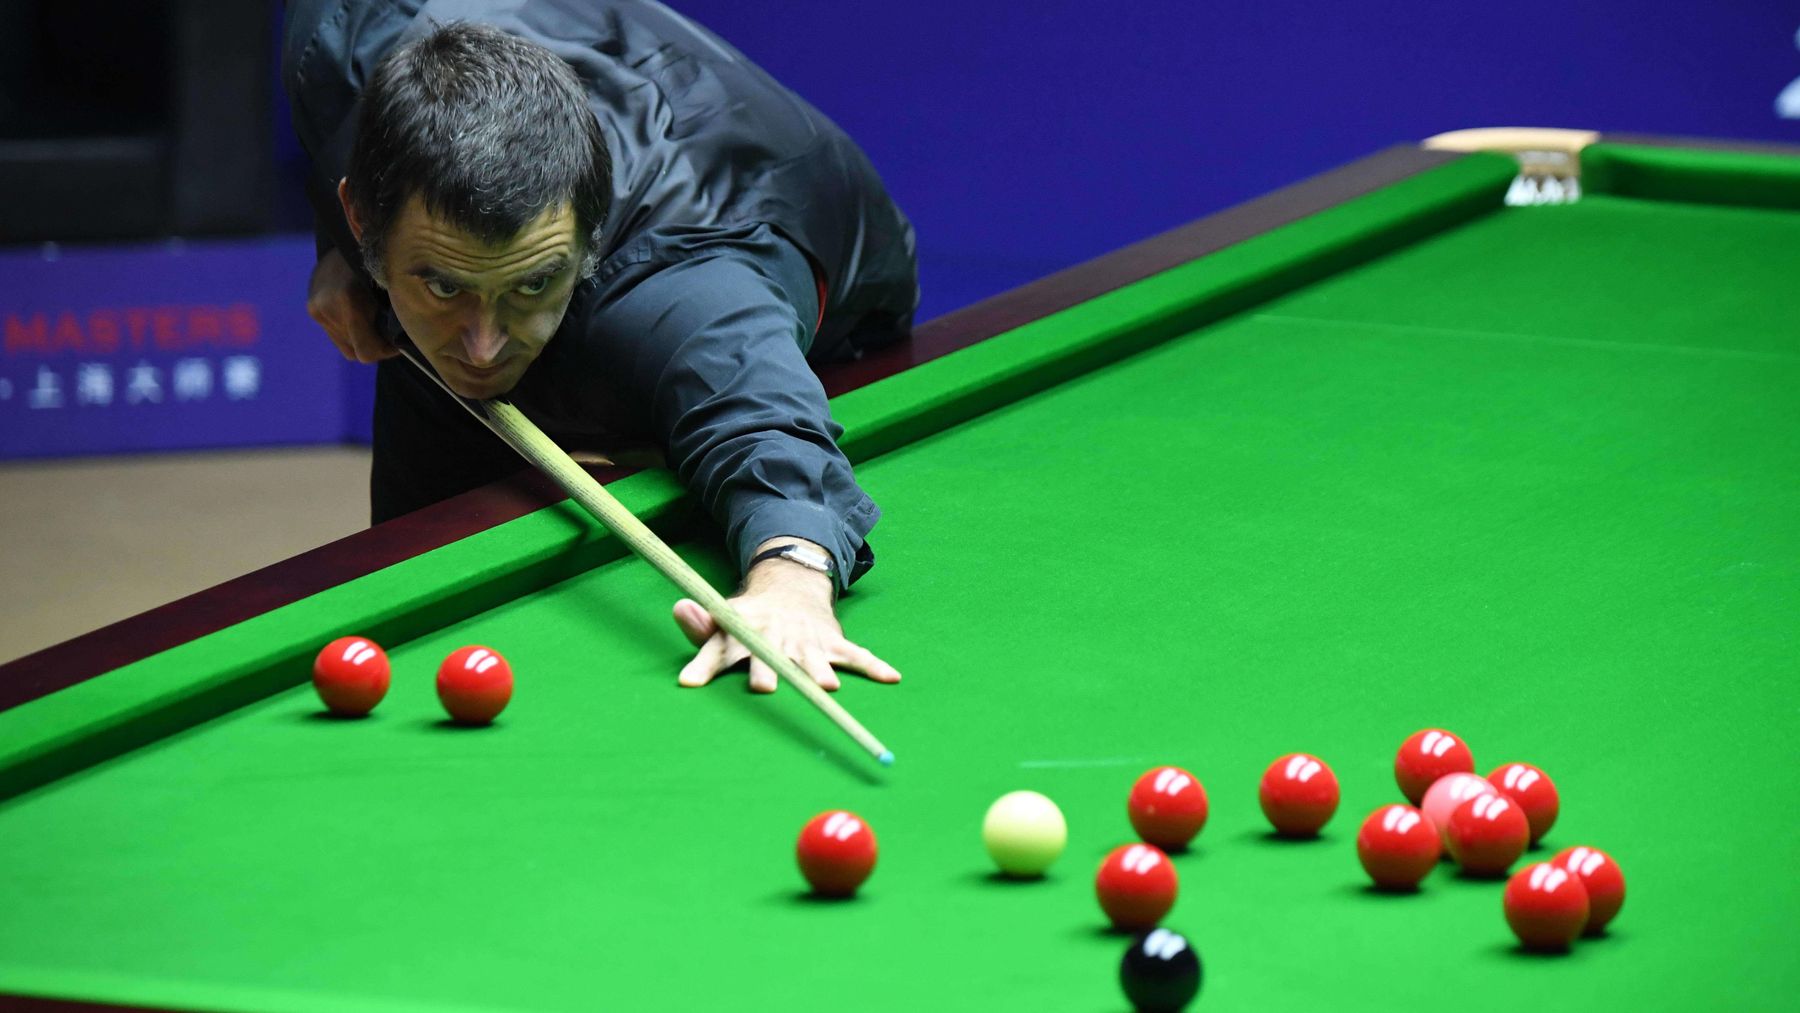 Snooker results Ronnie OSullivan beats Mark Selby 10-7 in Shanghai Masters semi-finals